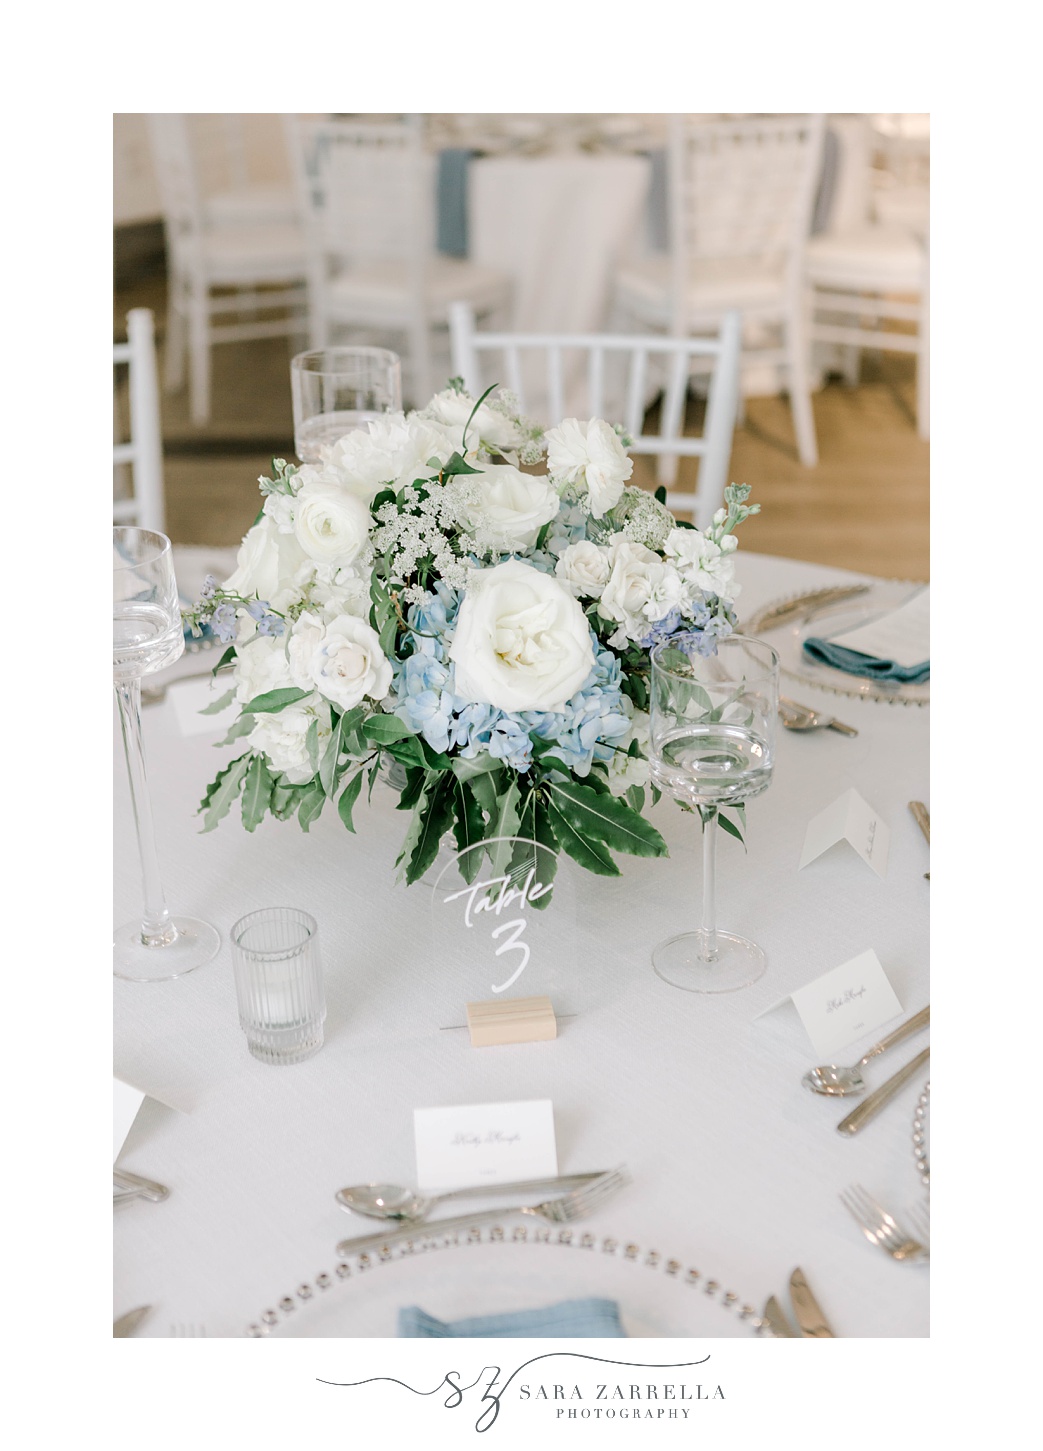 floral centerpiece with white and blue flowers for elegant Newport Beach House wedding reception